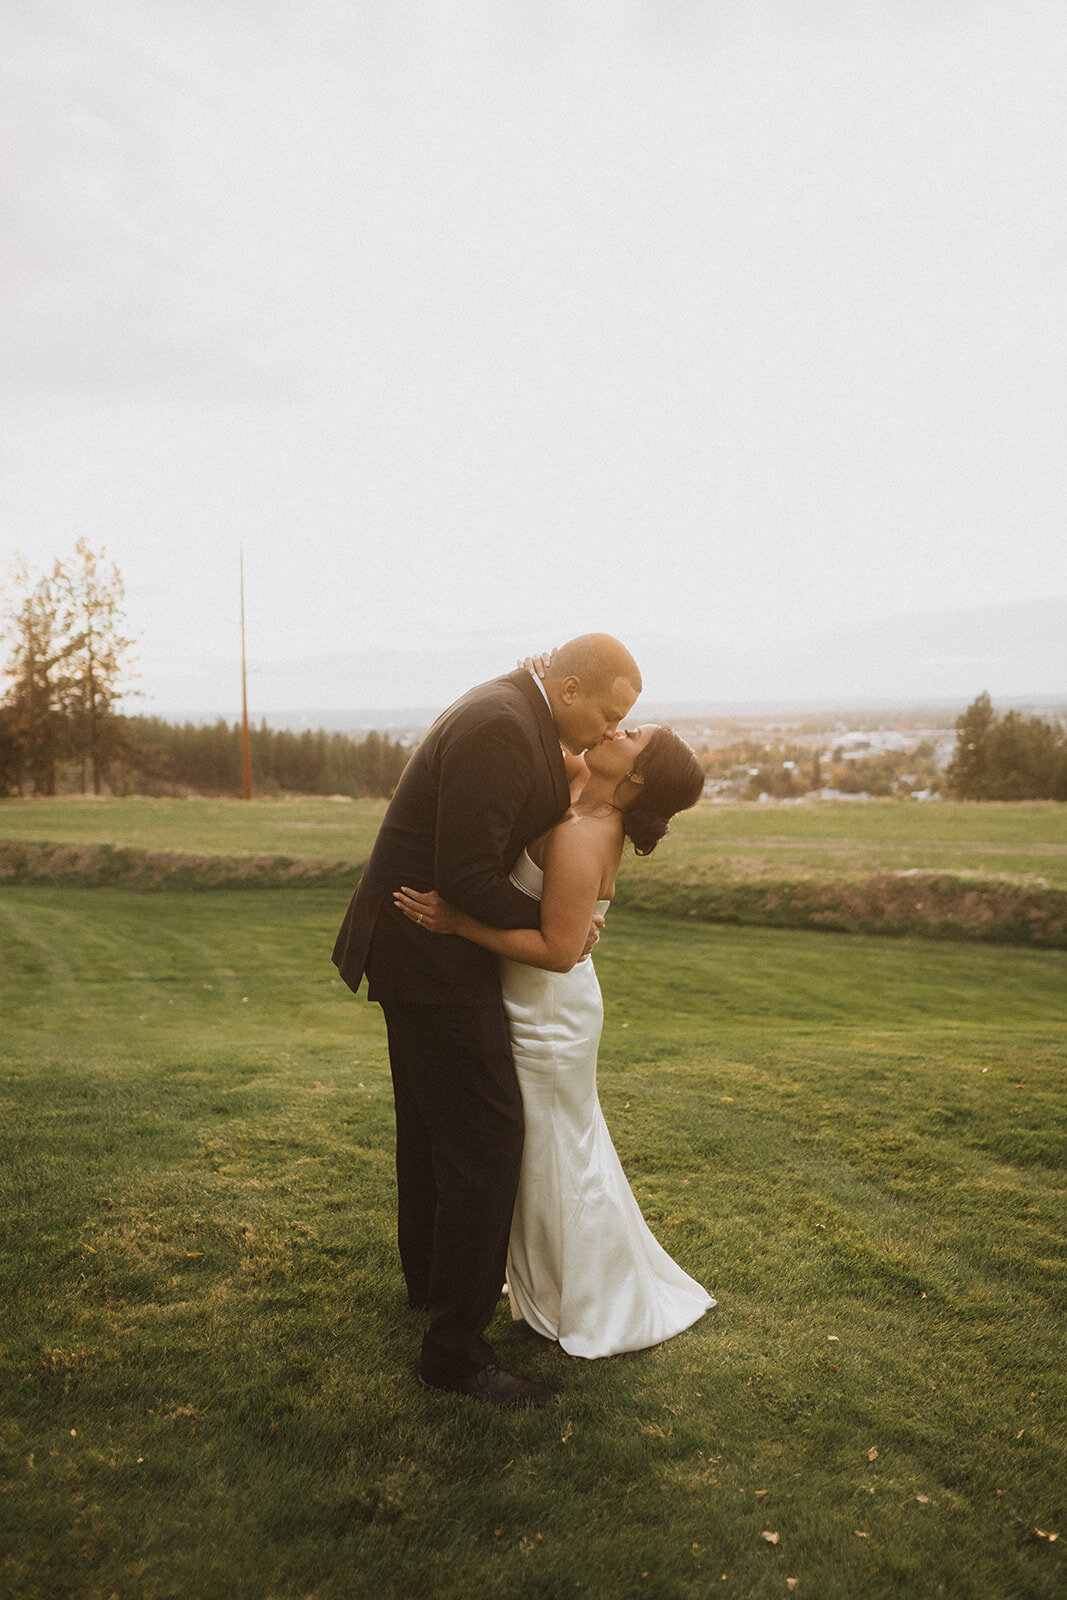 couple kisses each other during their intimate wedding sunset photos